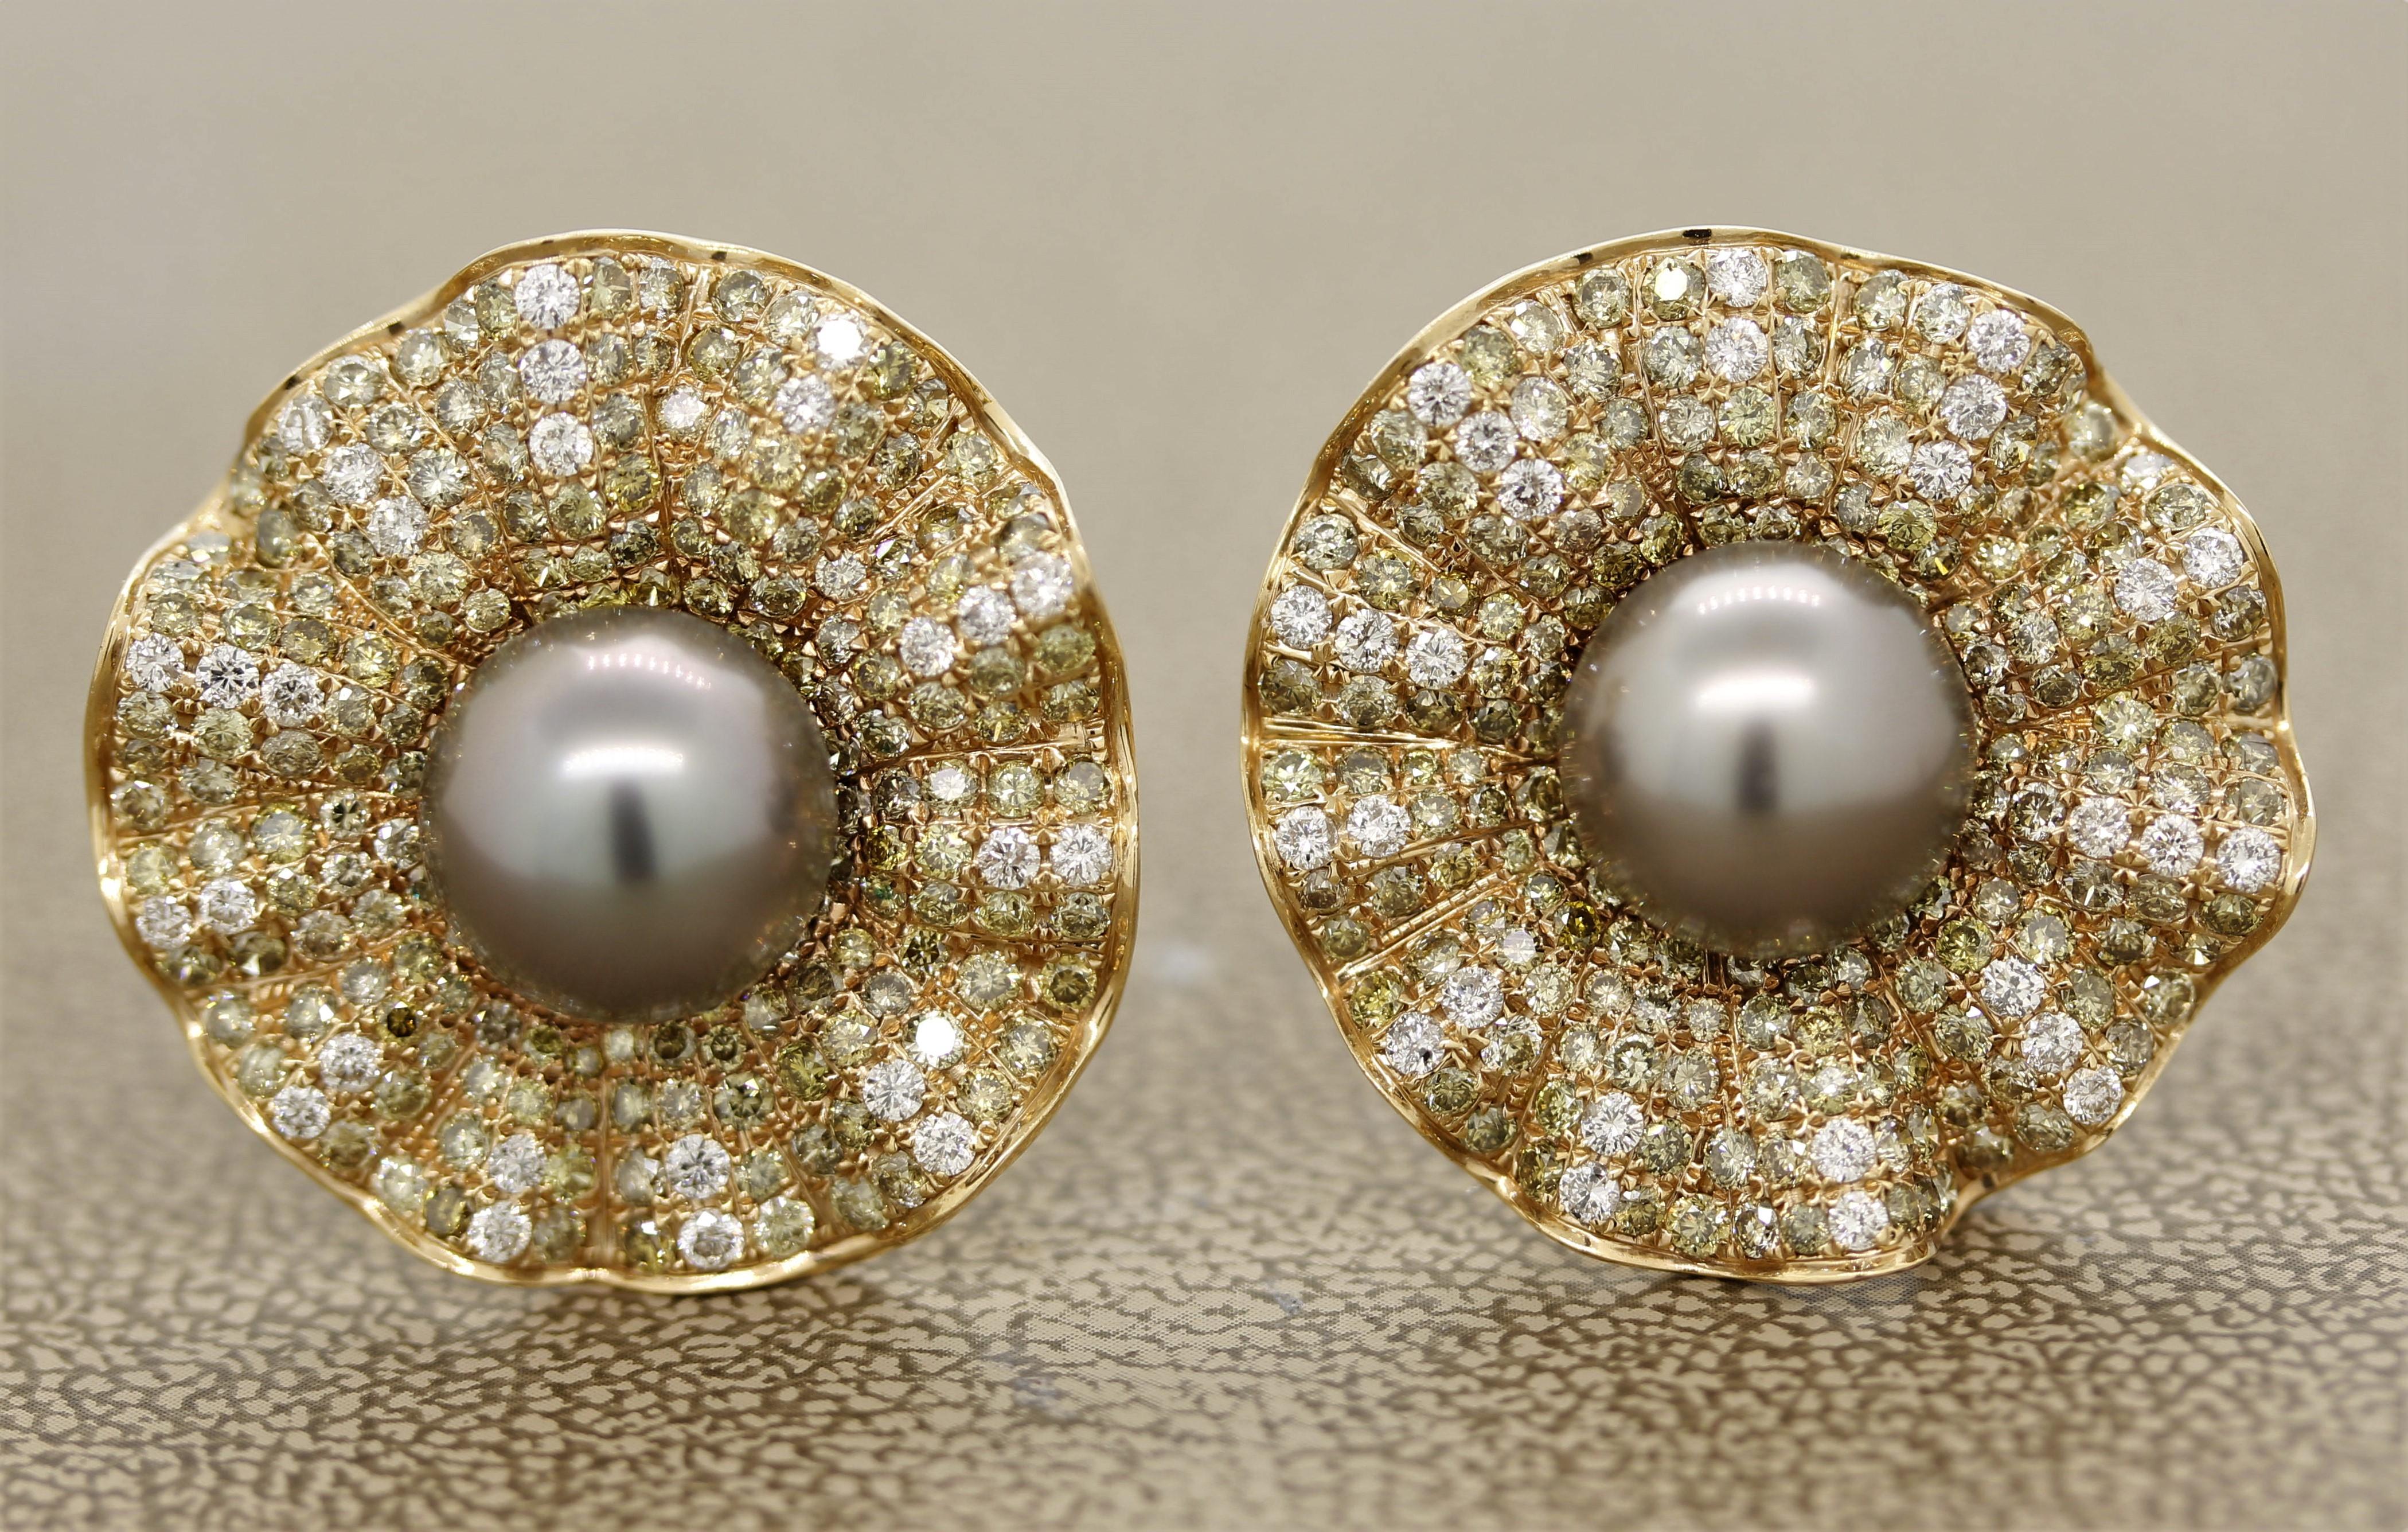 A stylish pair of earrings in a floral design. They feature 5.14 carats of white and fancy colored diamonds which adds contrast between their colors. In the center of each earring is a 10mm round Tahitian pearl with great luster and shine. Made in